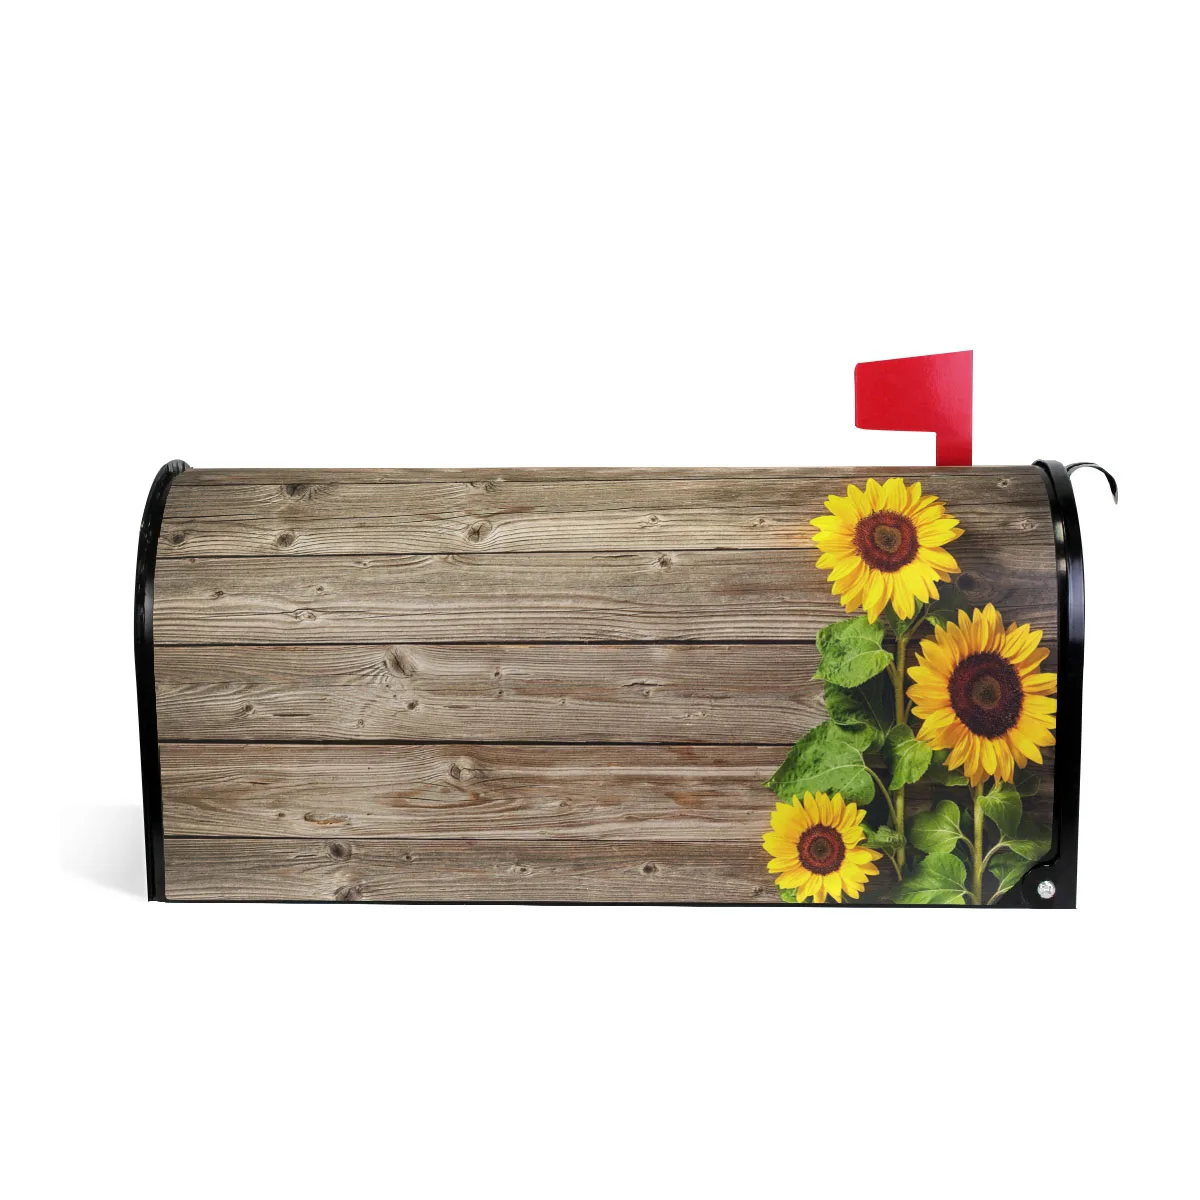 Magnetic Mailbox Cover Greetings Personalized Home Garden Decorative Mailbox Post Wrap Standard/Large Sized Outdoor Courtyard Garden Fence Chrysanthemum Flowers 